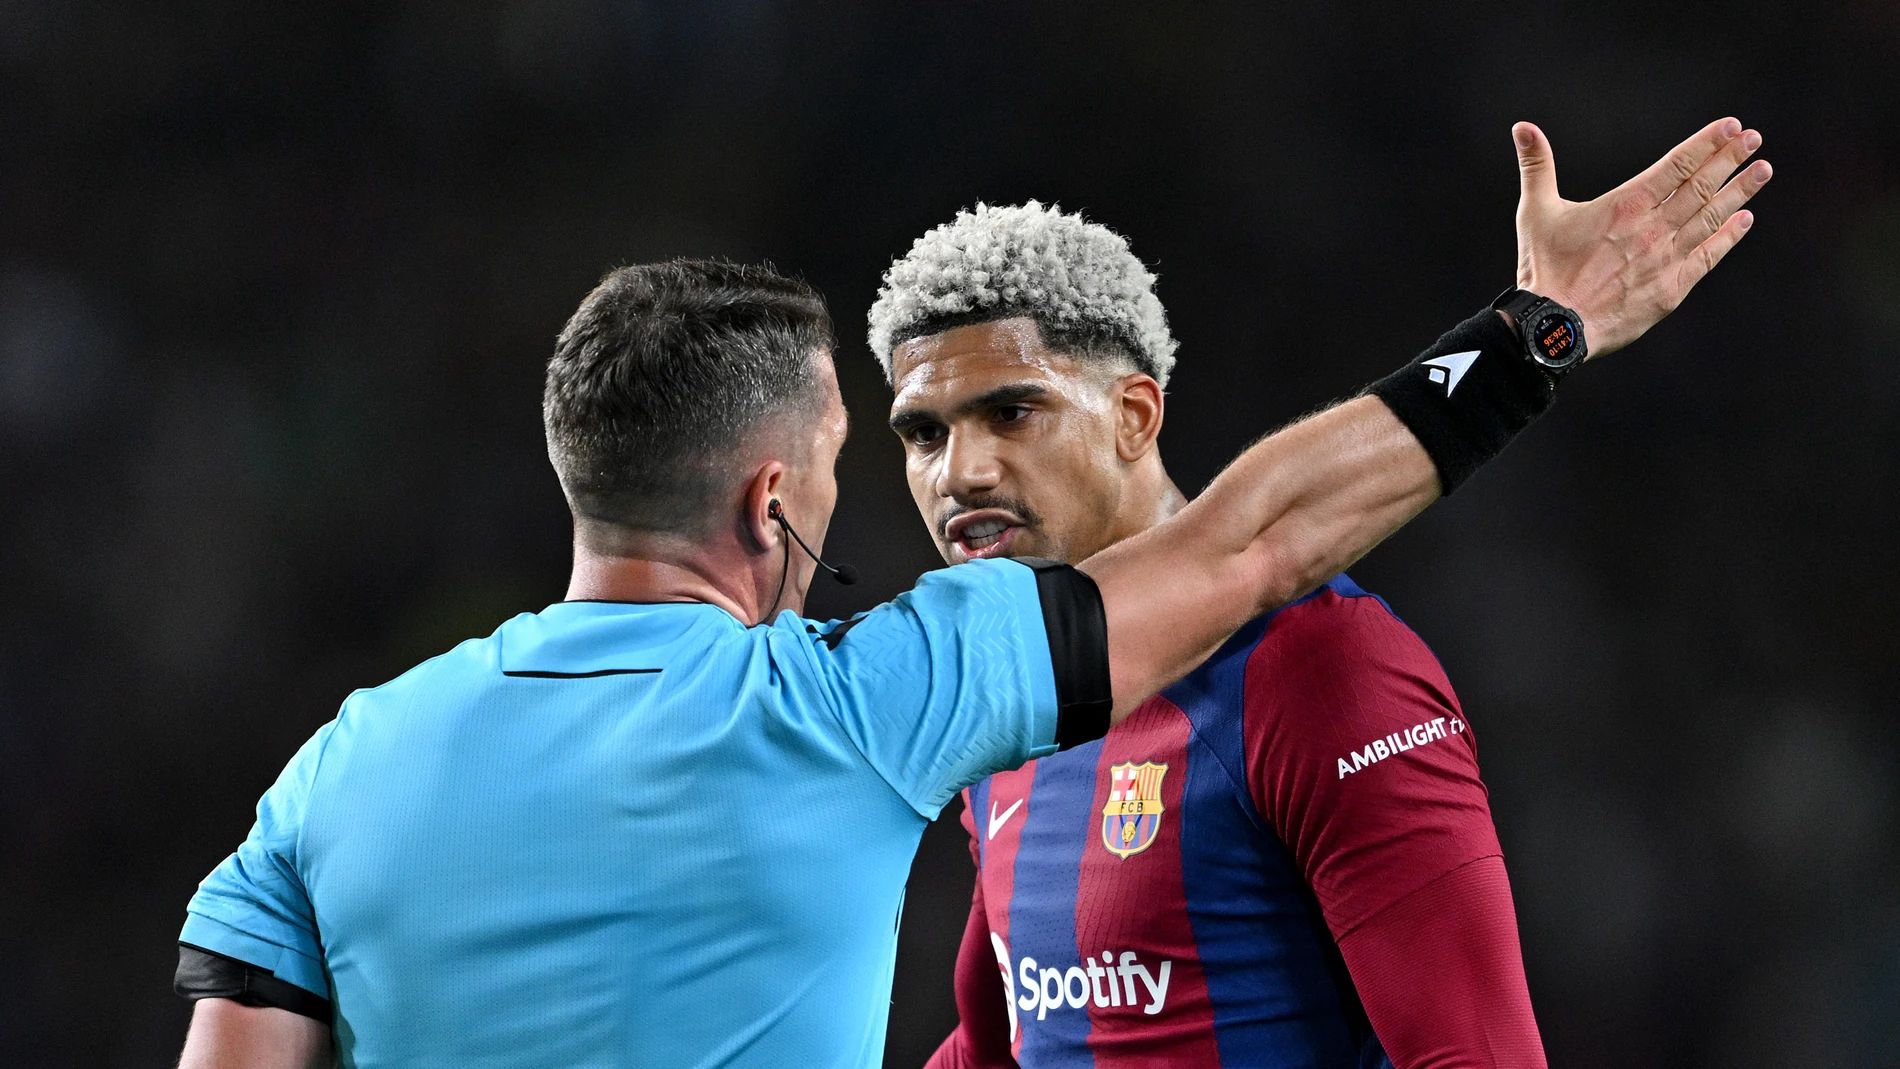 Barcelona star potentially lucky to escape ban after hand gesture towards referee